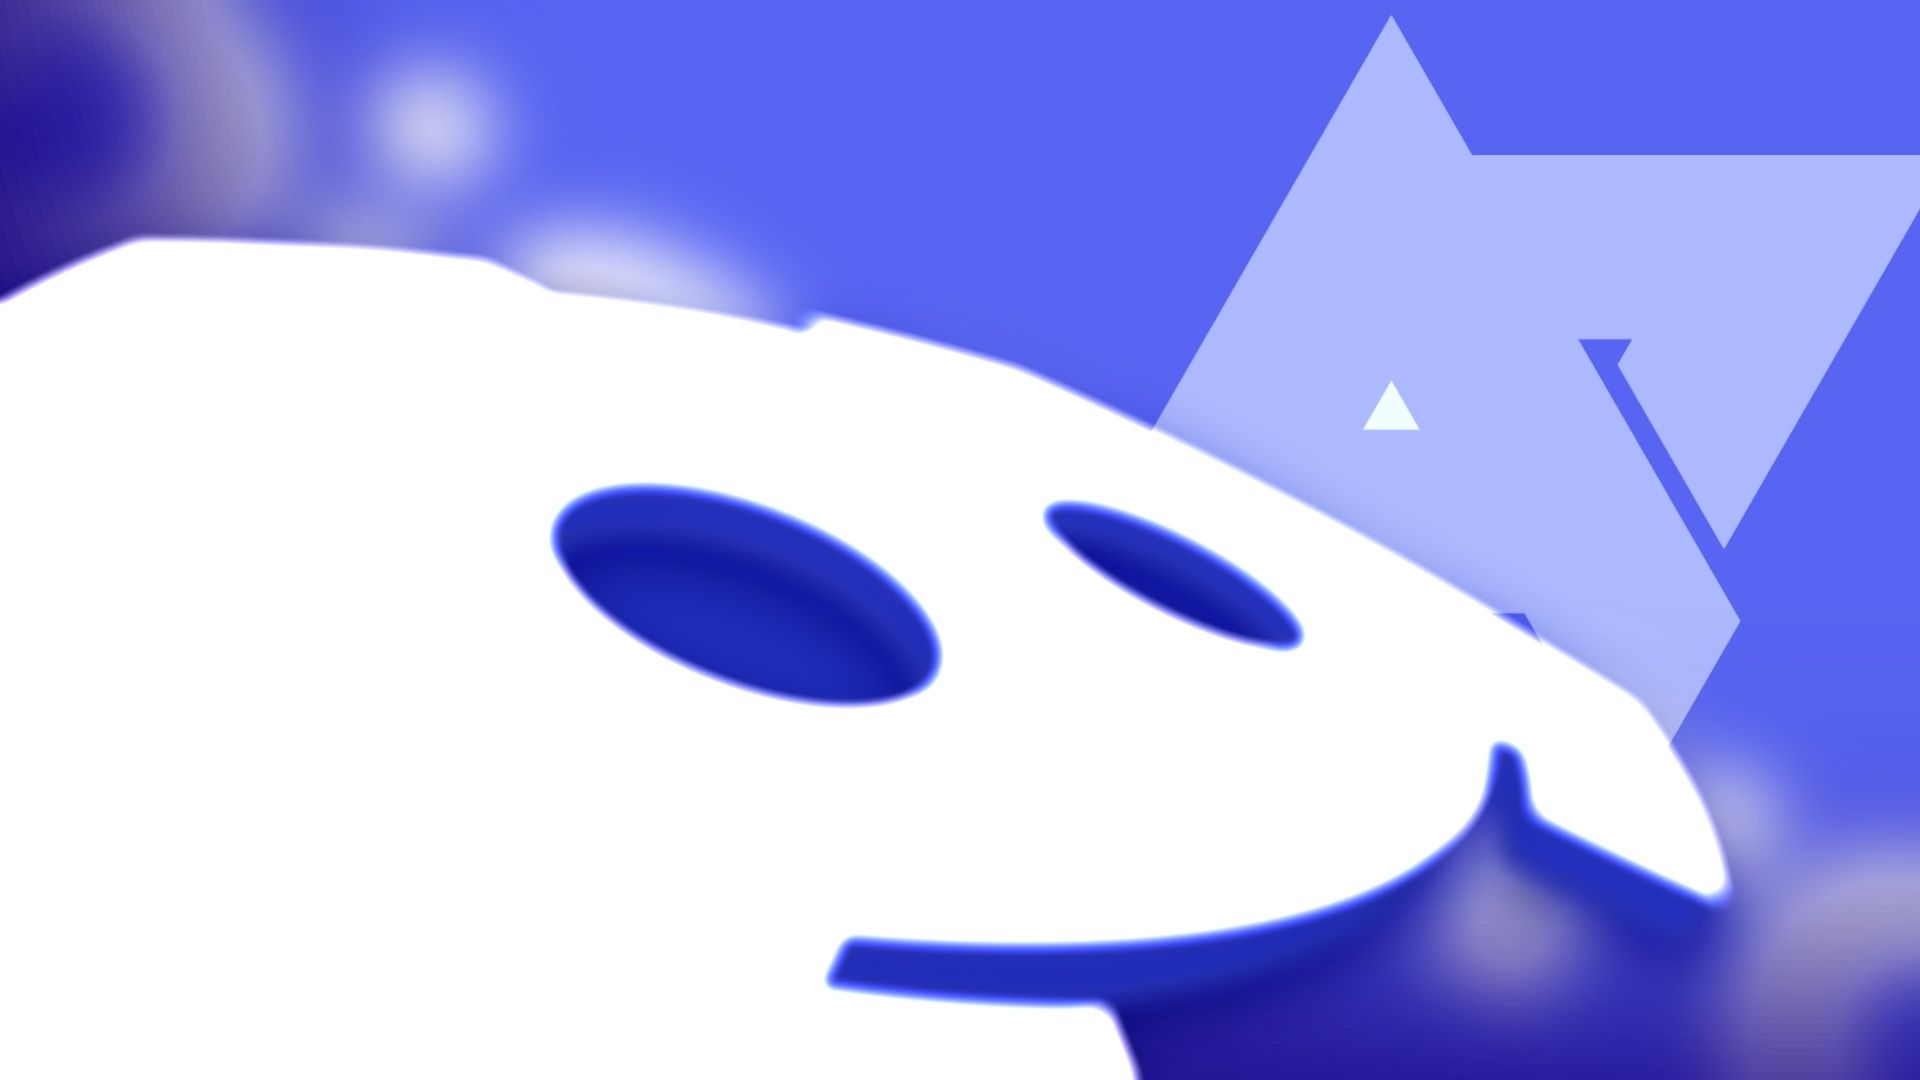 white discord robot logo intersecting with blue AP logo in blue background